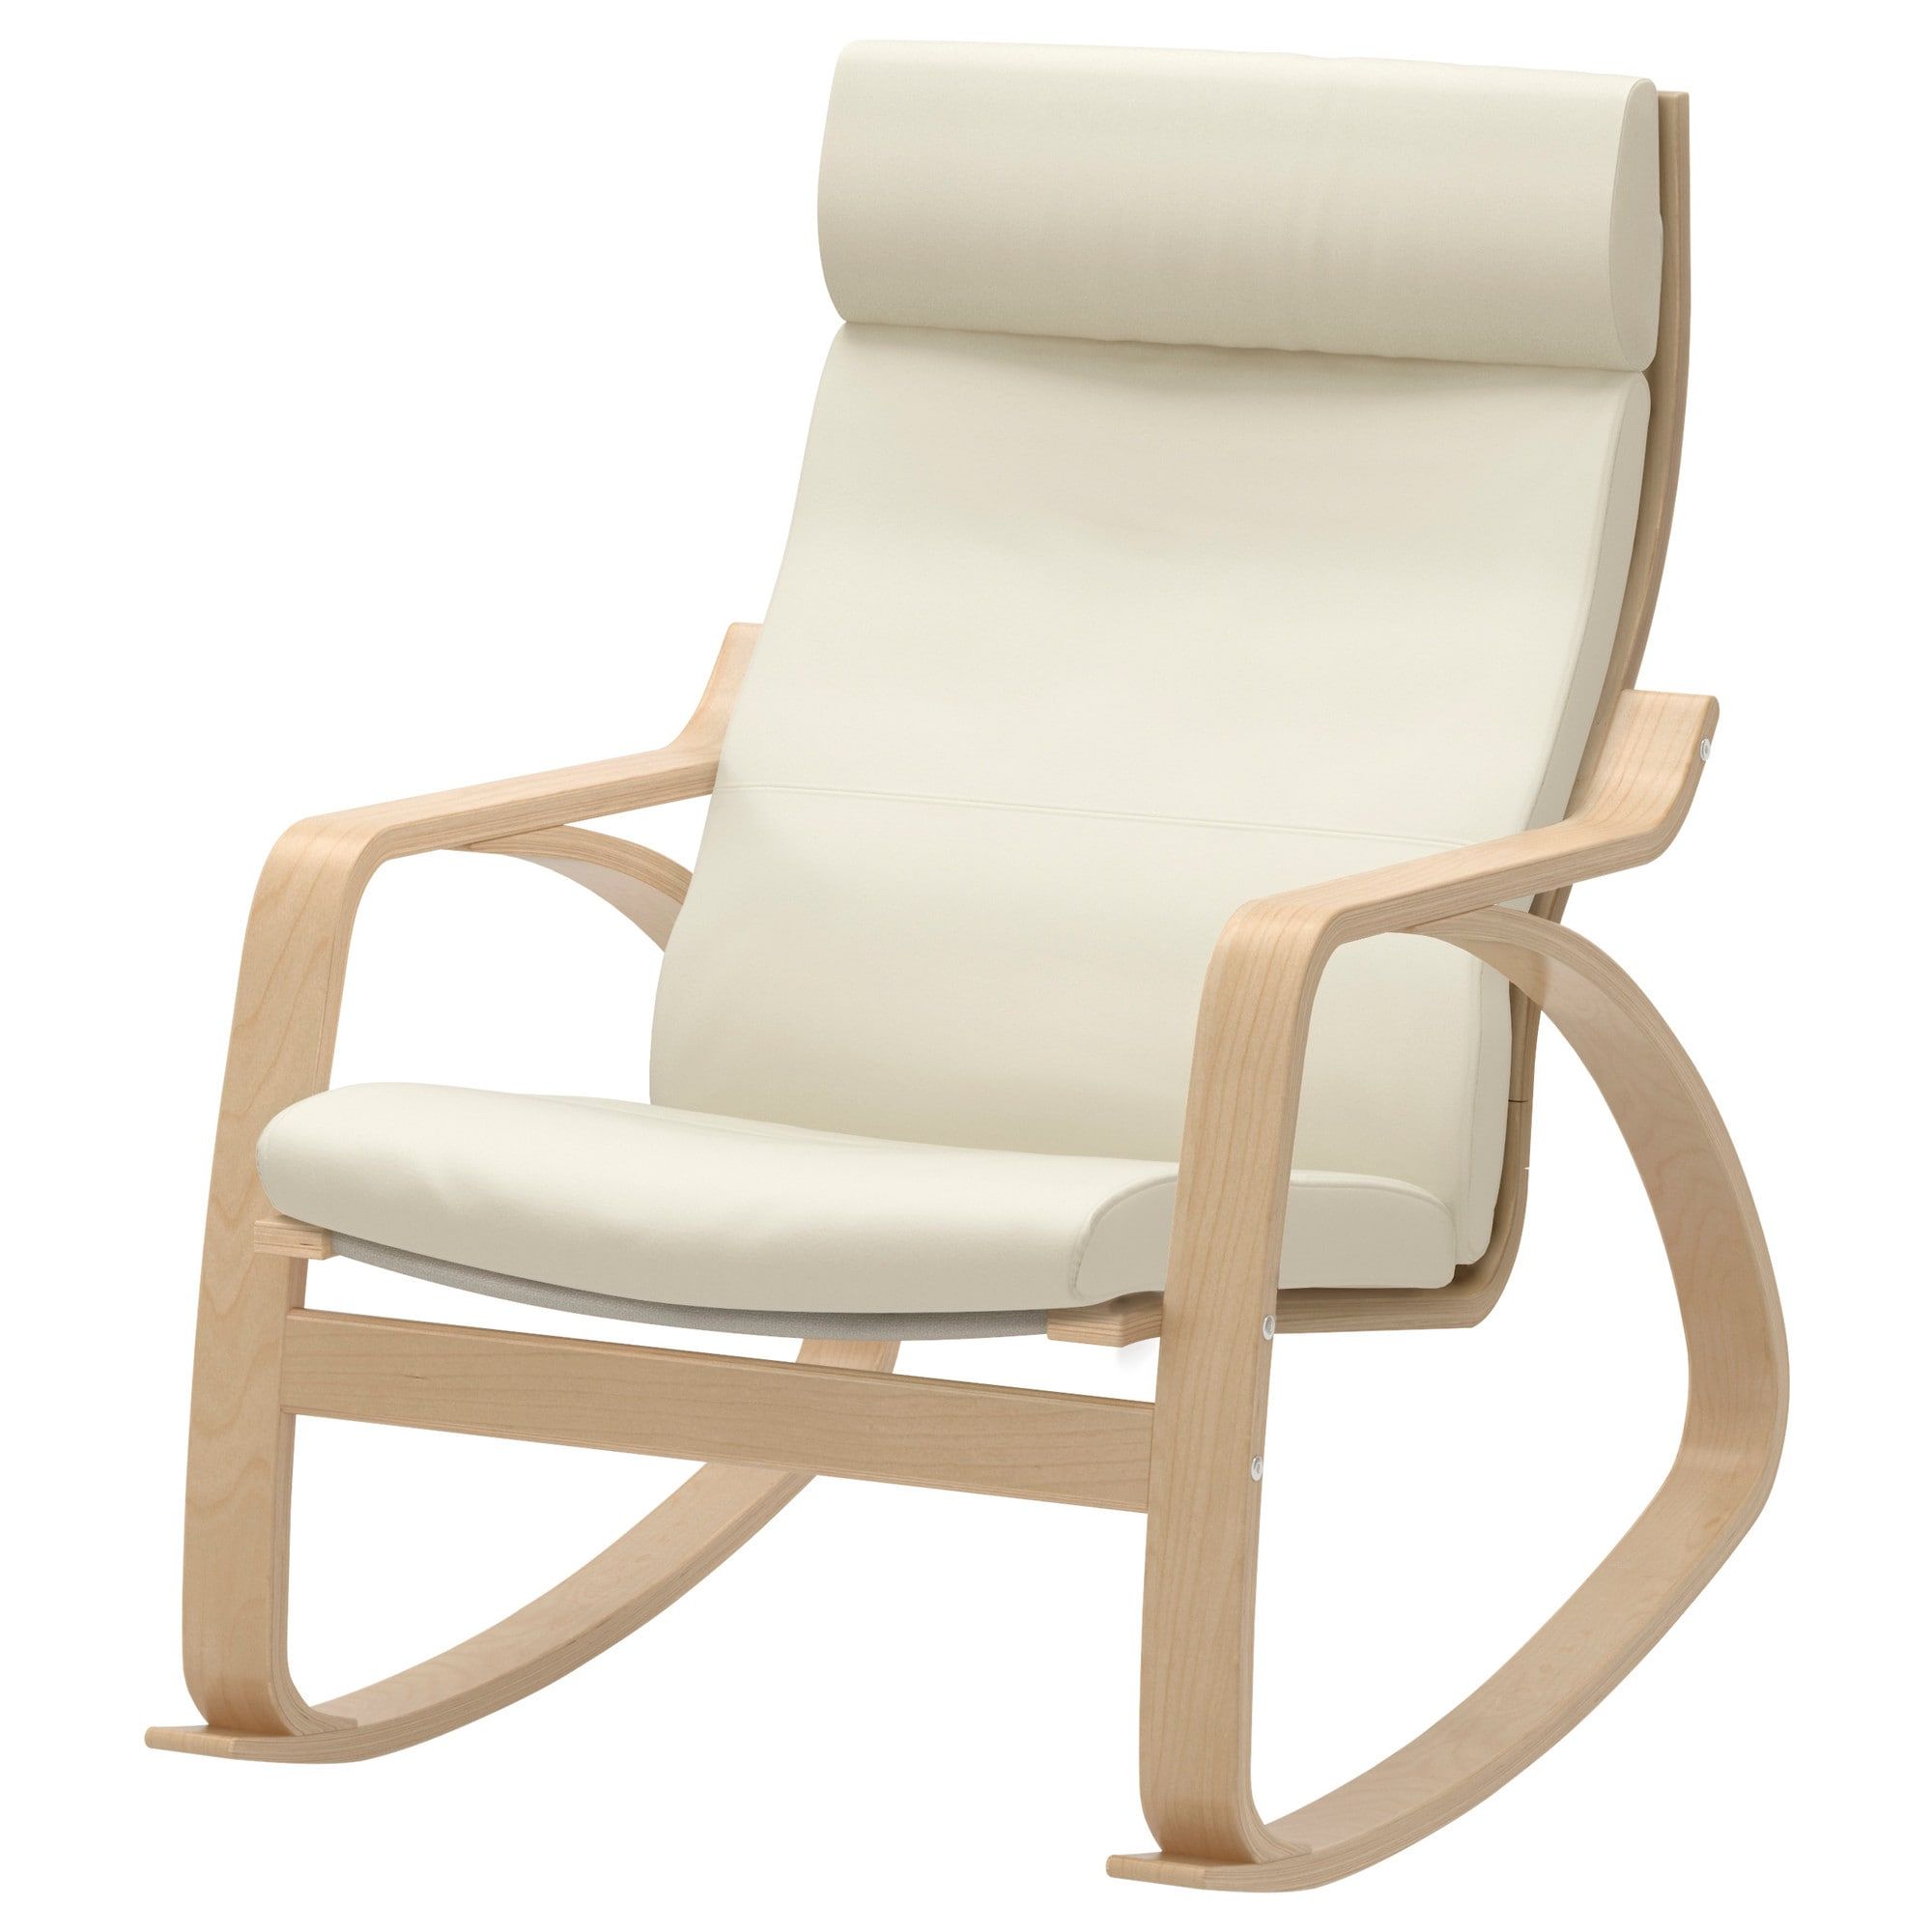 Rocking Chair Poäng Birch Veneer, Robust Glose Off White Throughout Rocking Chairs In Cream Fabric And White (View 20 of 20)